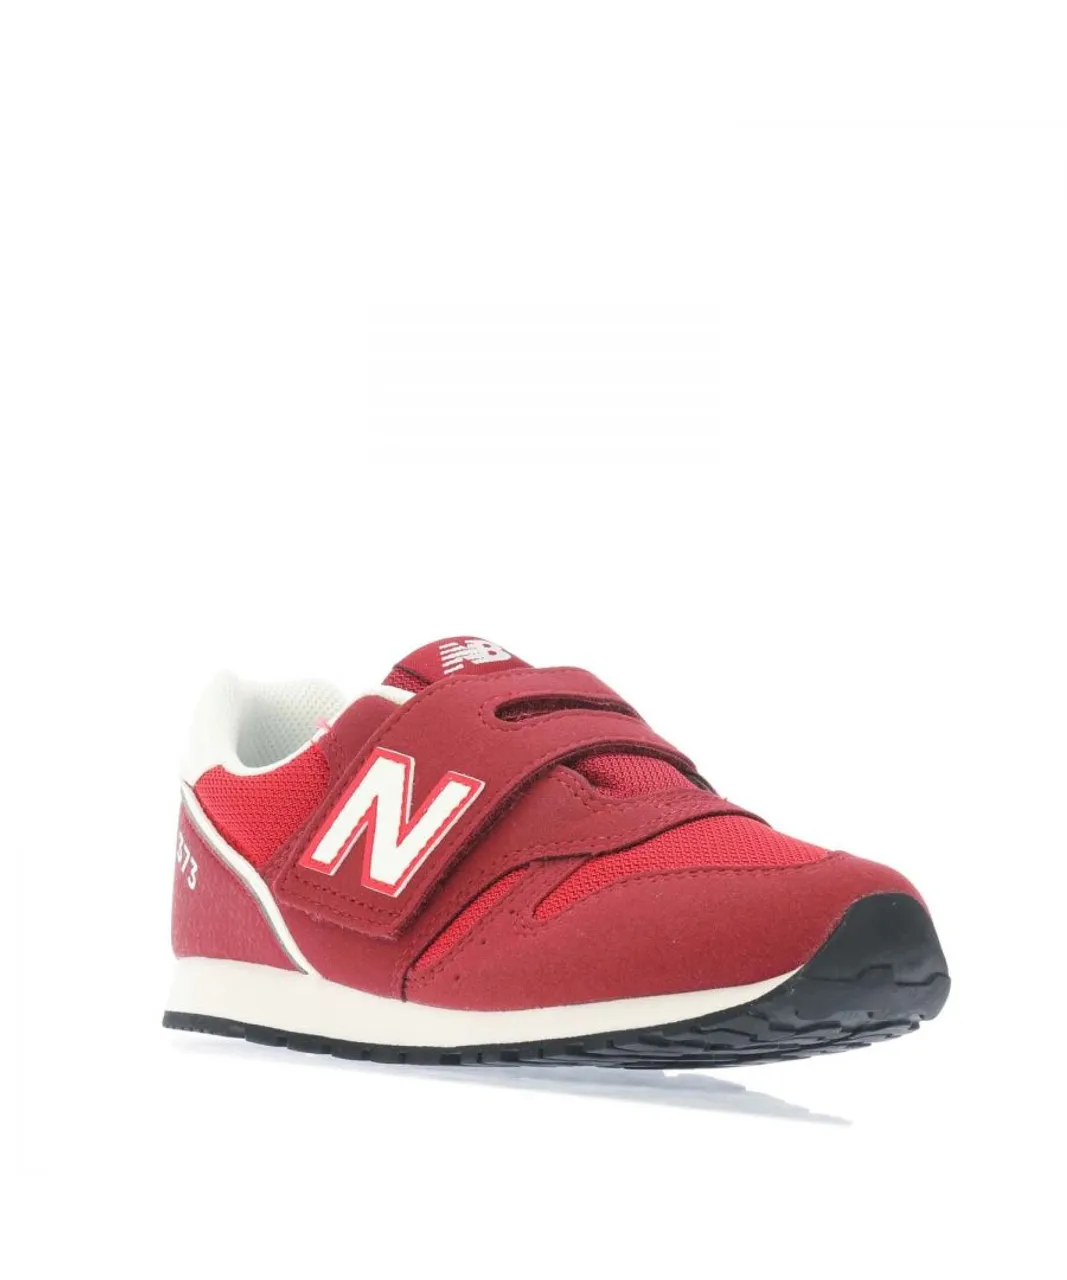 New Balance Boys Boy's 373 Hook and Loop Trainers in Red